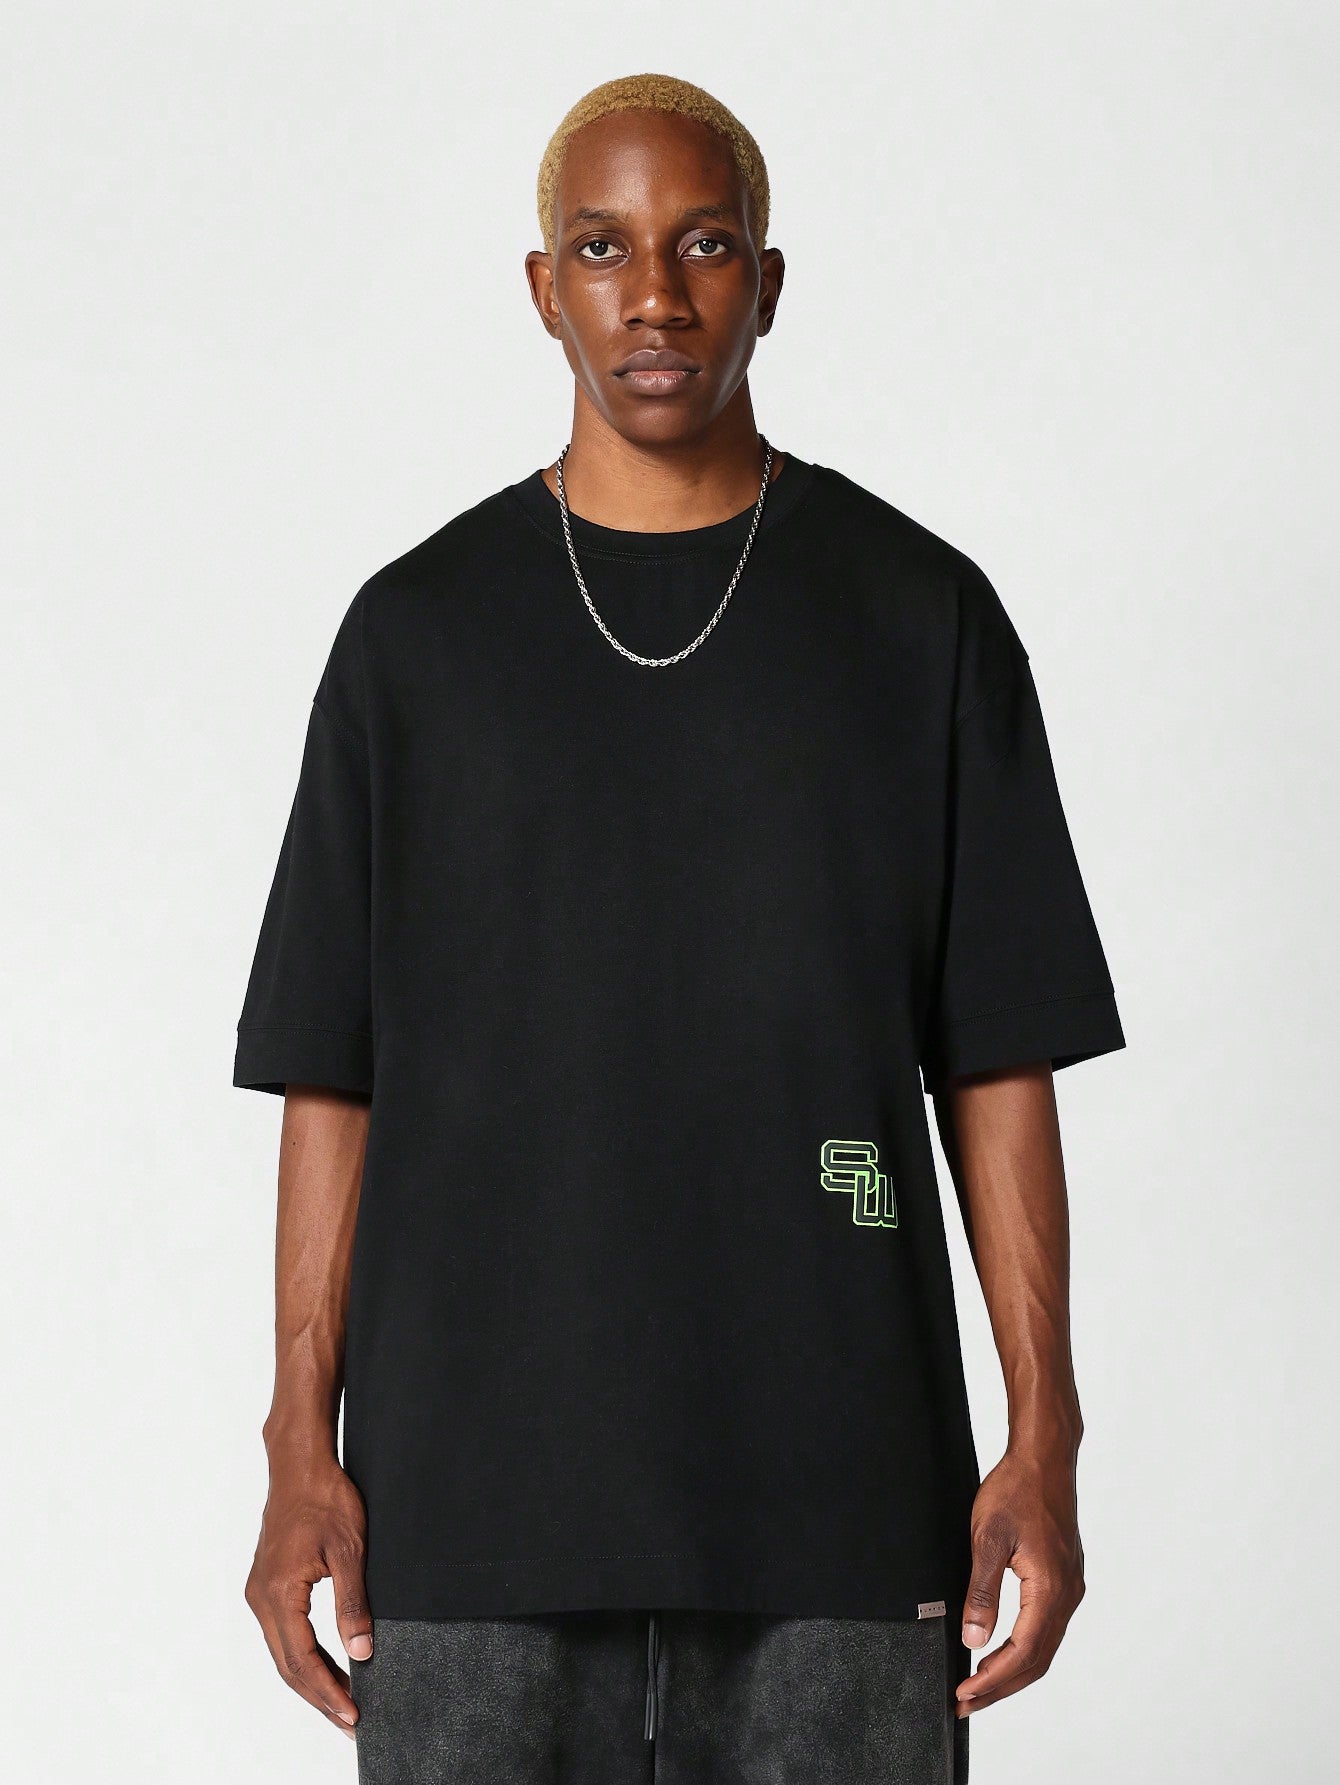 Oversized Fit Tee With Back Graphic Print College Ready